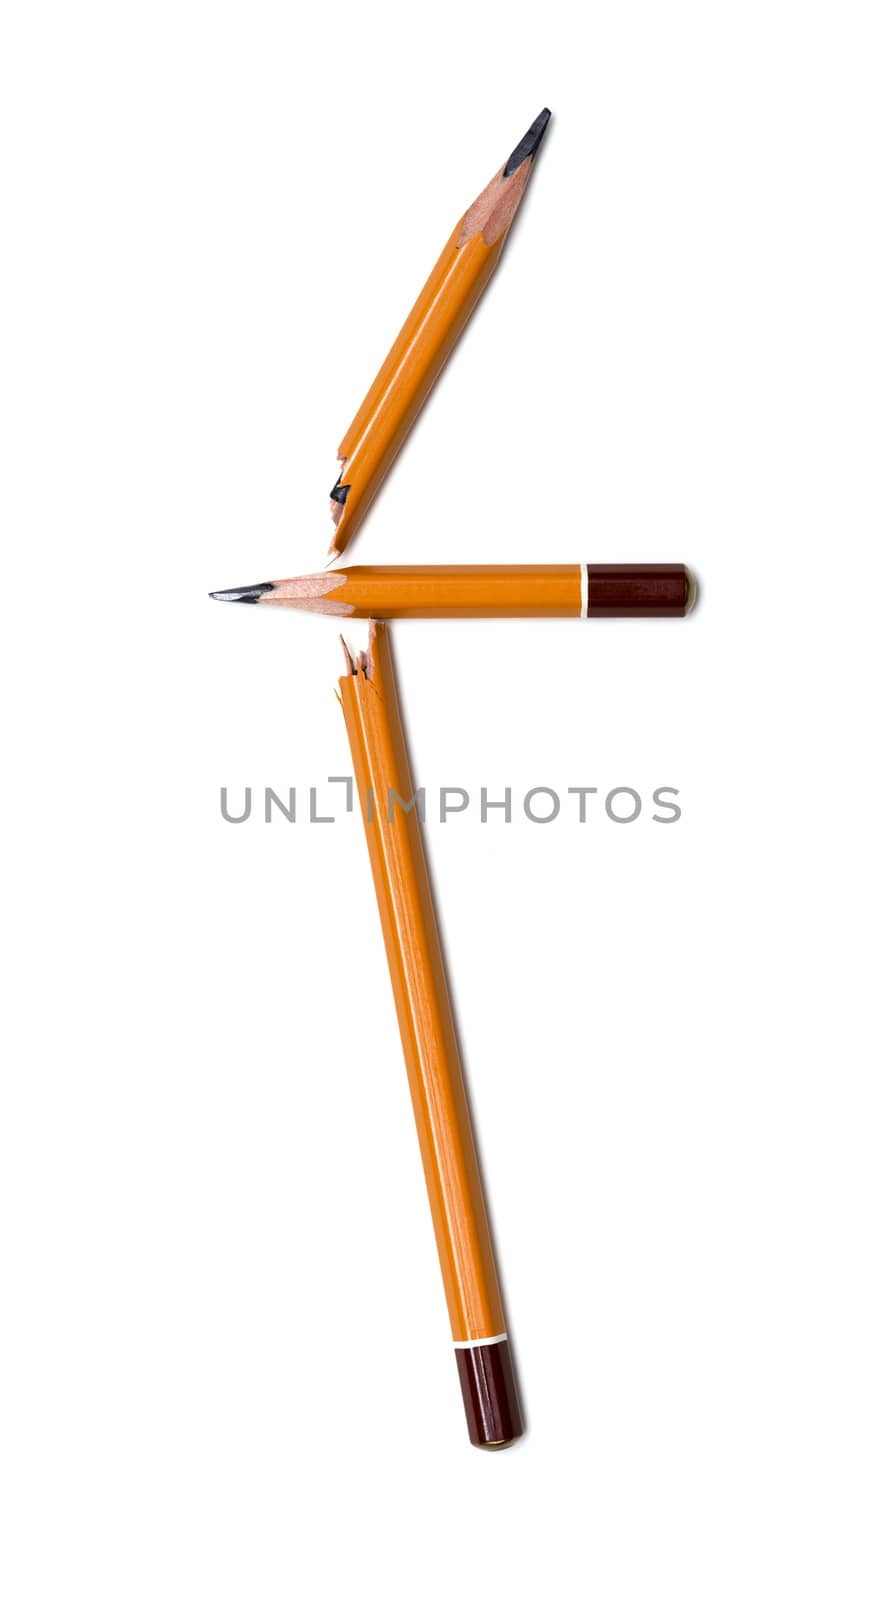 broken pencil on a white background by DNKSTUDIO